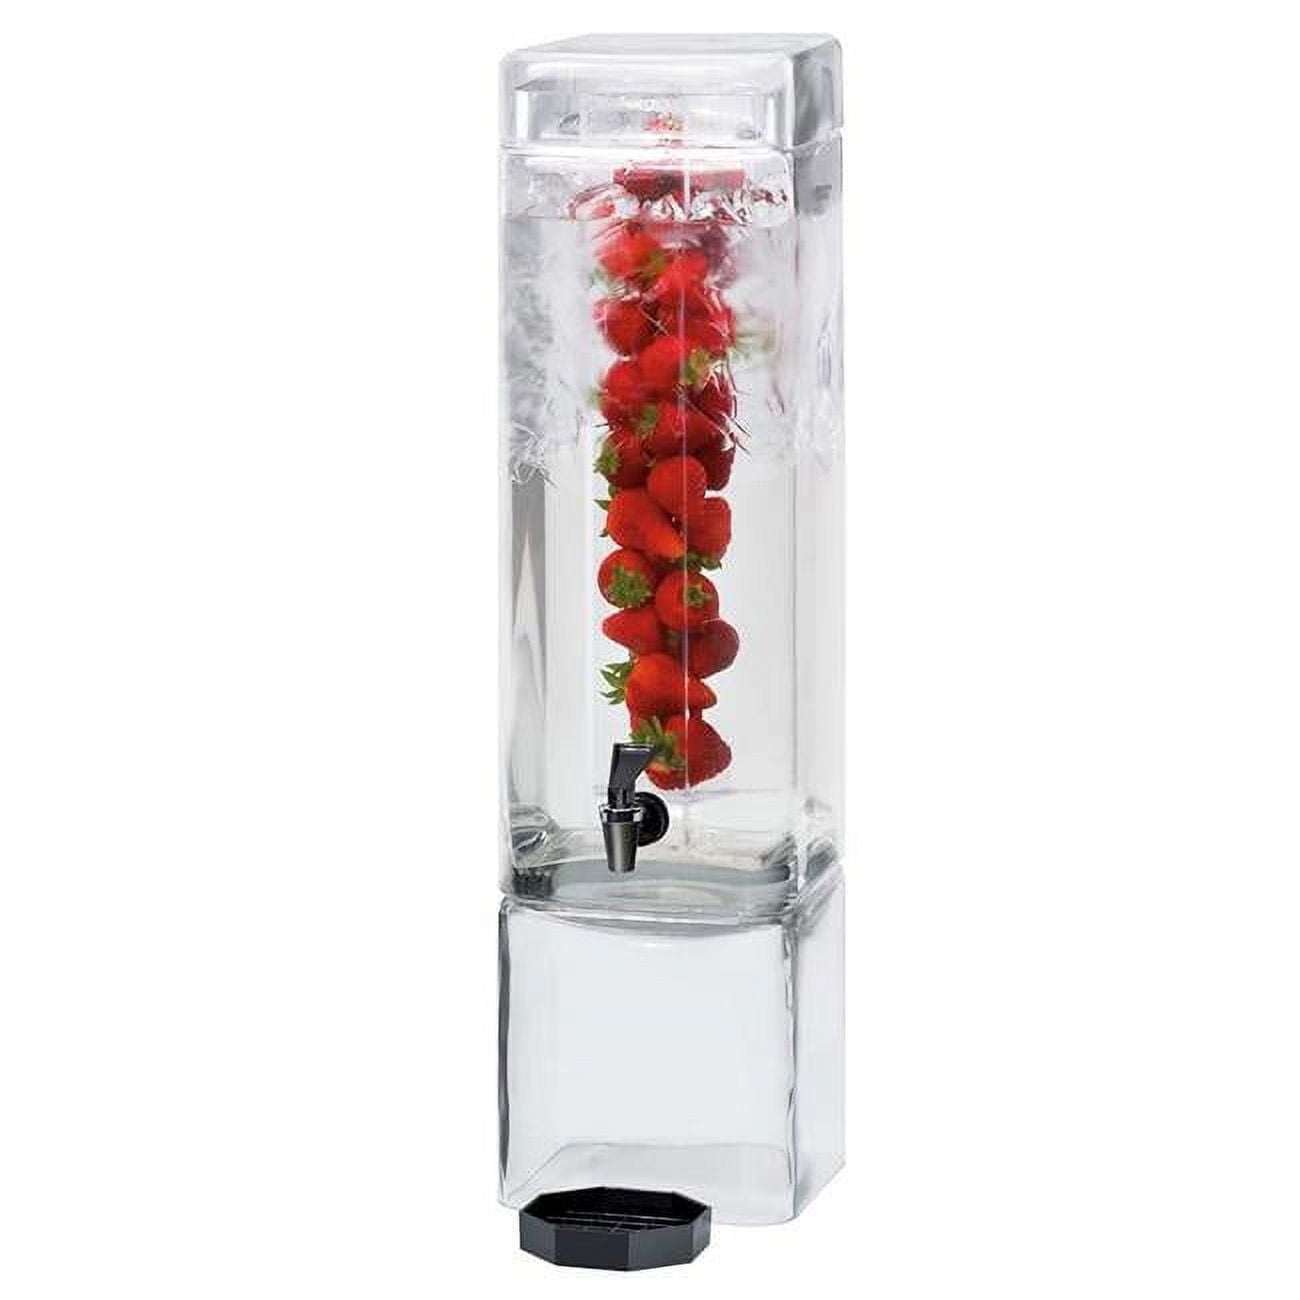 1112-3inf 3 Gal Beverage Dispenser With Infusion, Square - 7 X 9 X 26.5 In.